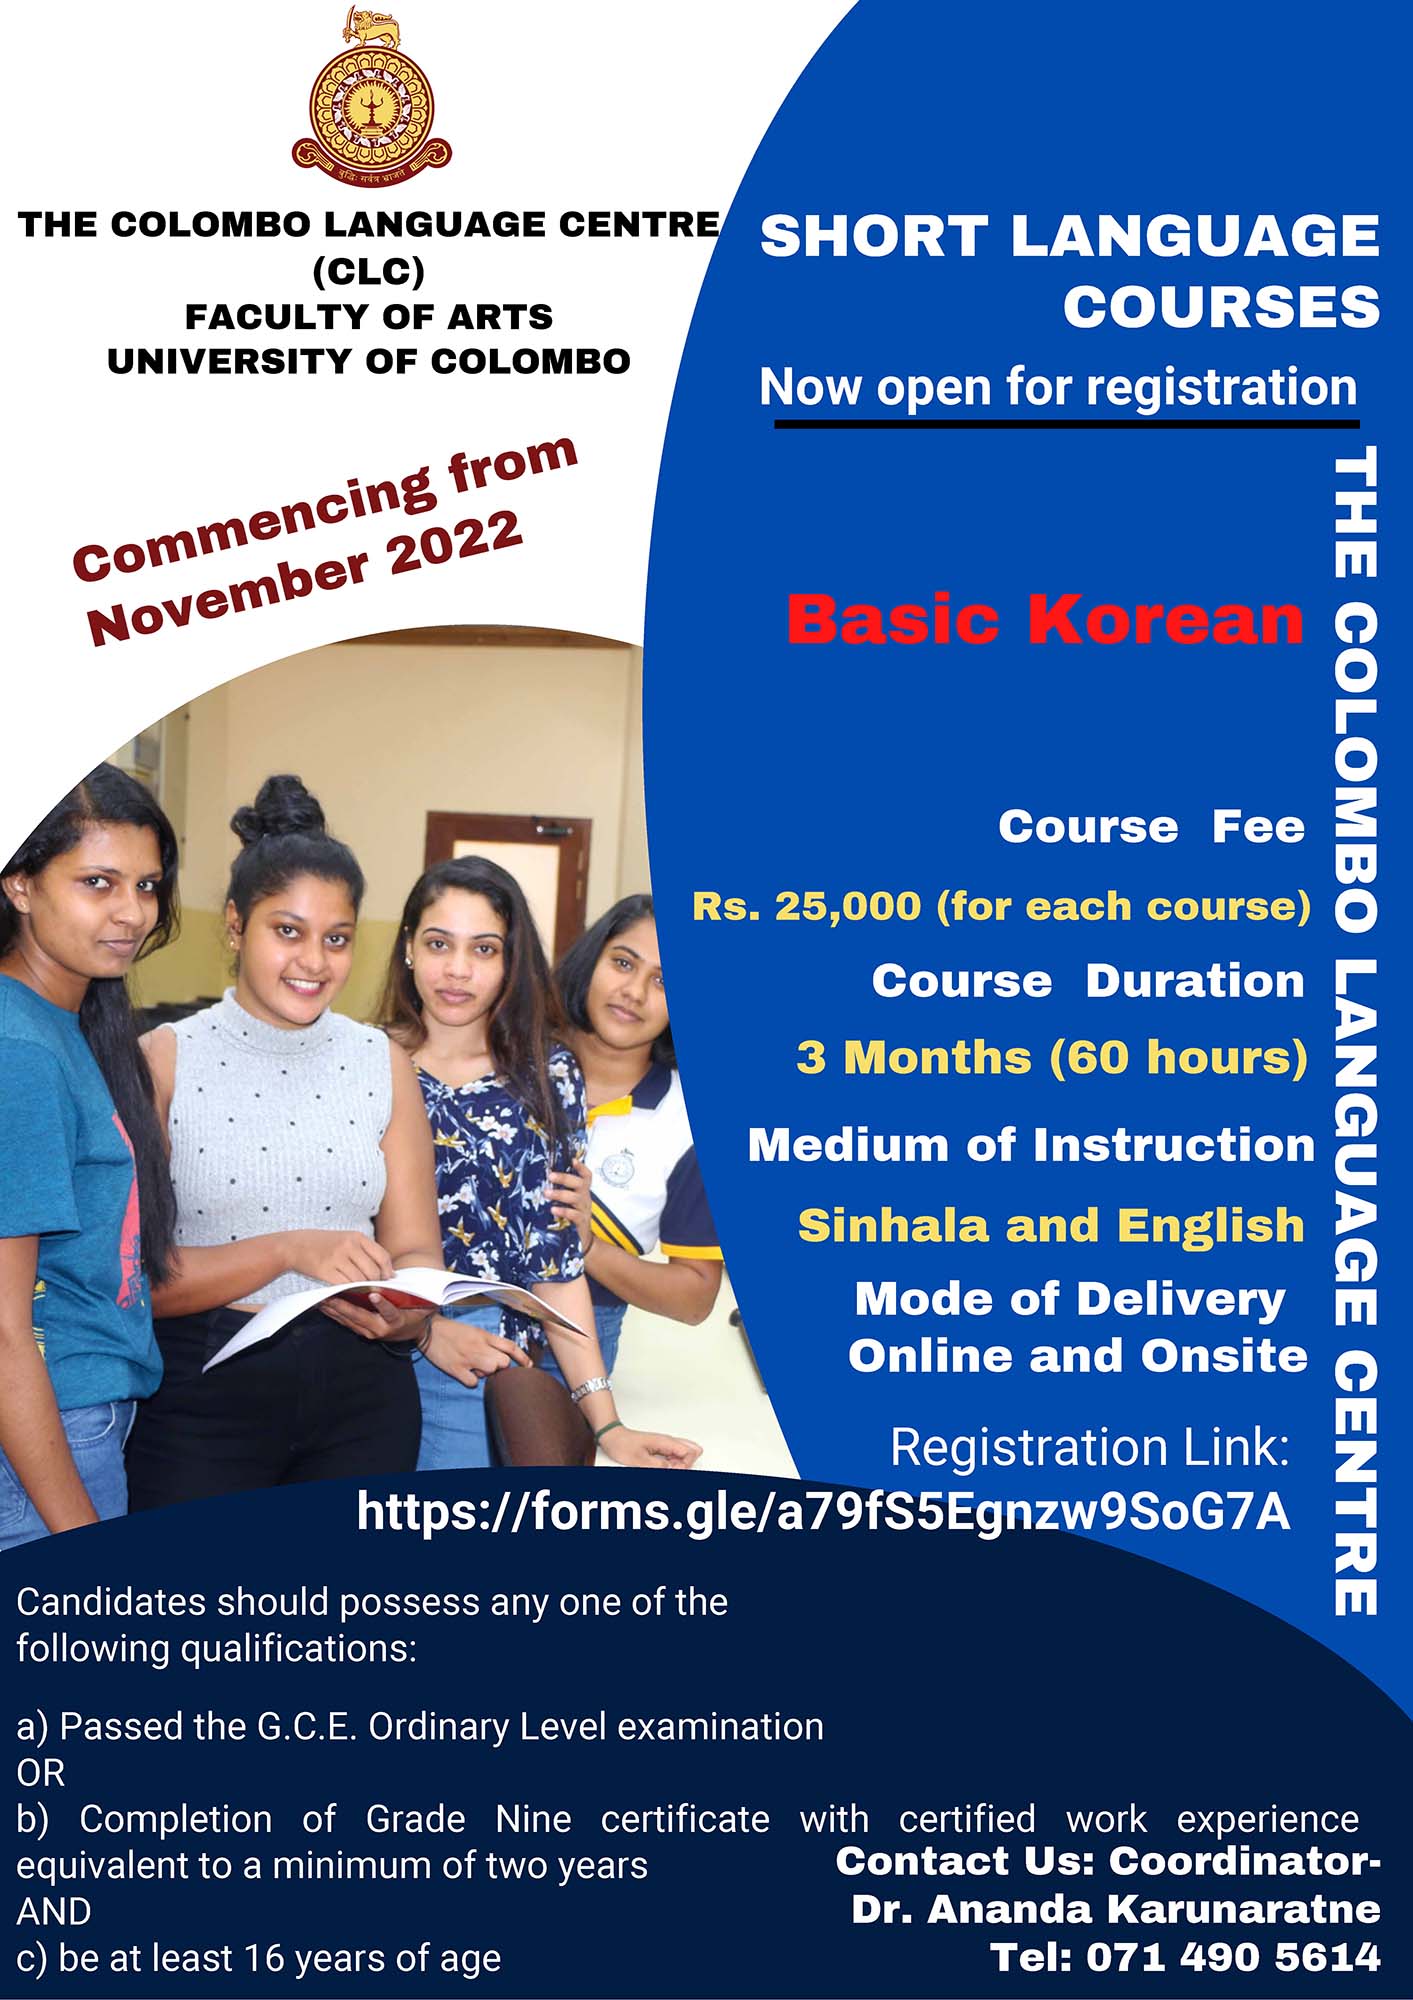 Short Courses in Tamil, French, Hindi, Japanese, Korean Languages 2022 - University of Colombo